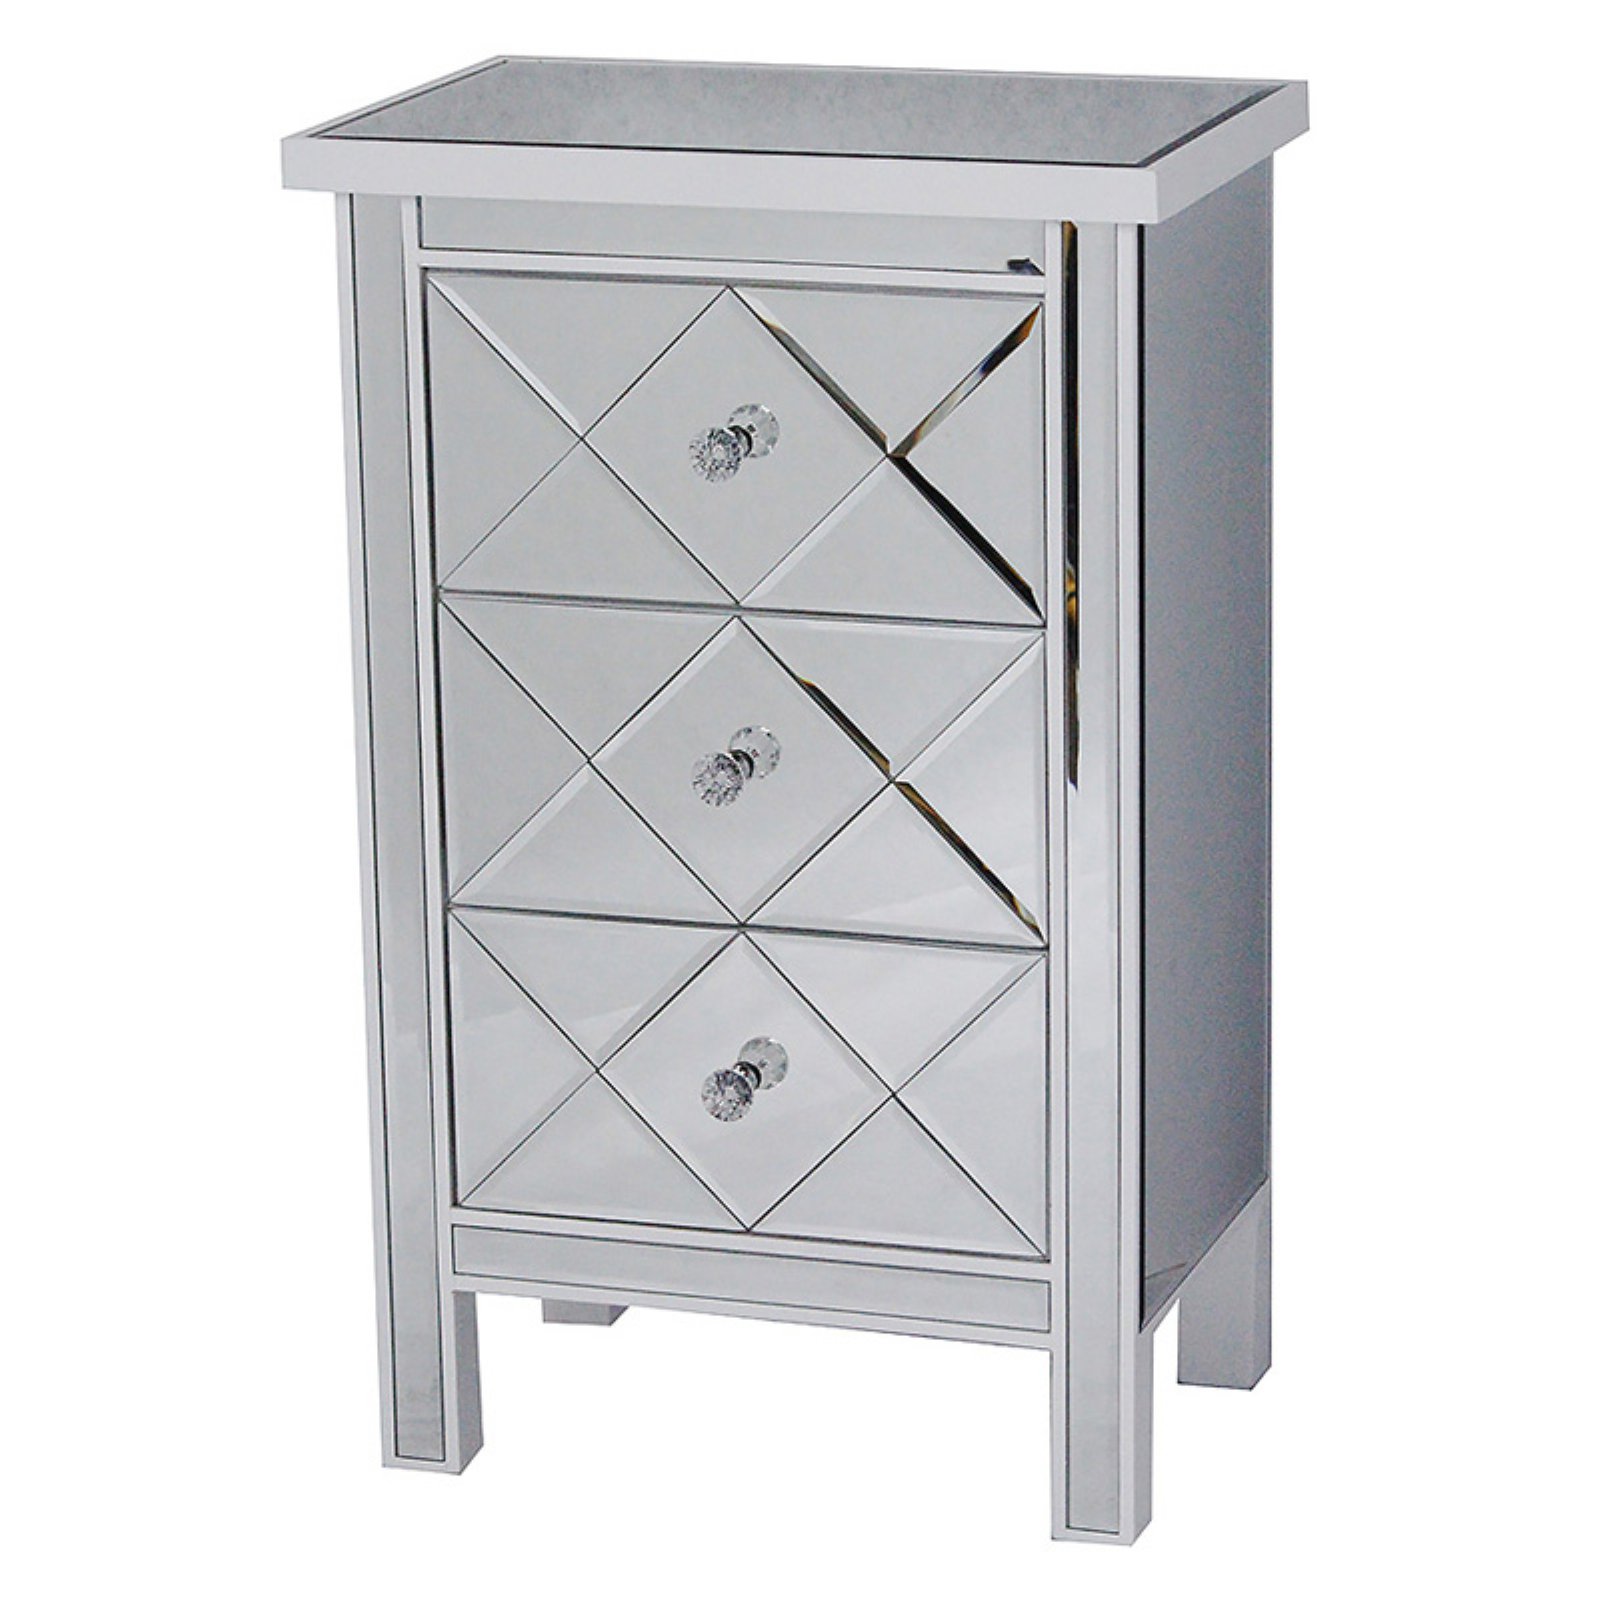 Heather Ann Creations Emmy 3 Drawer Mirrored Accent Cabinet - image 1 of 7